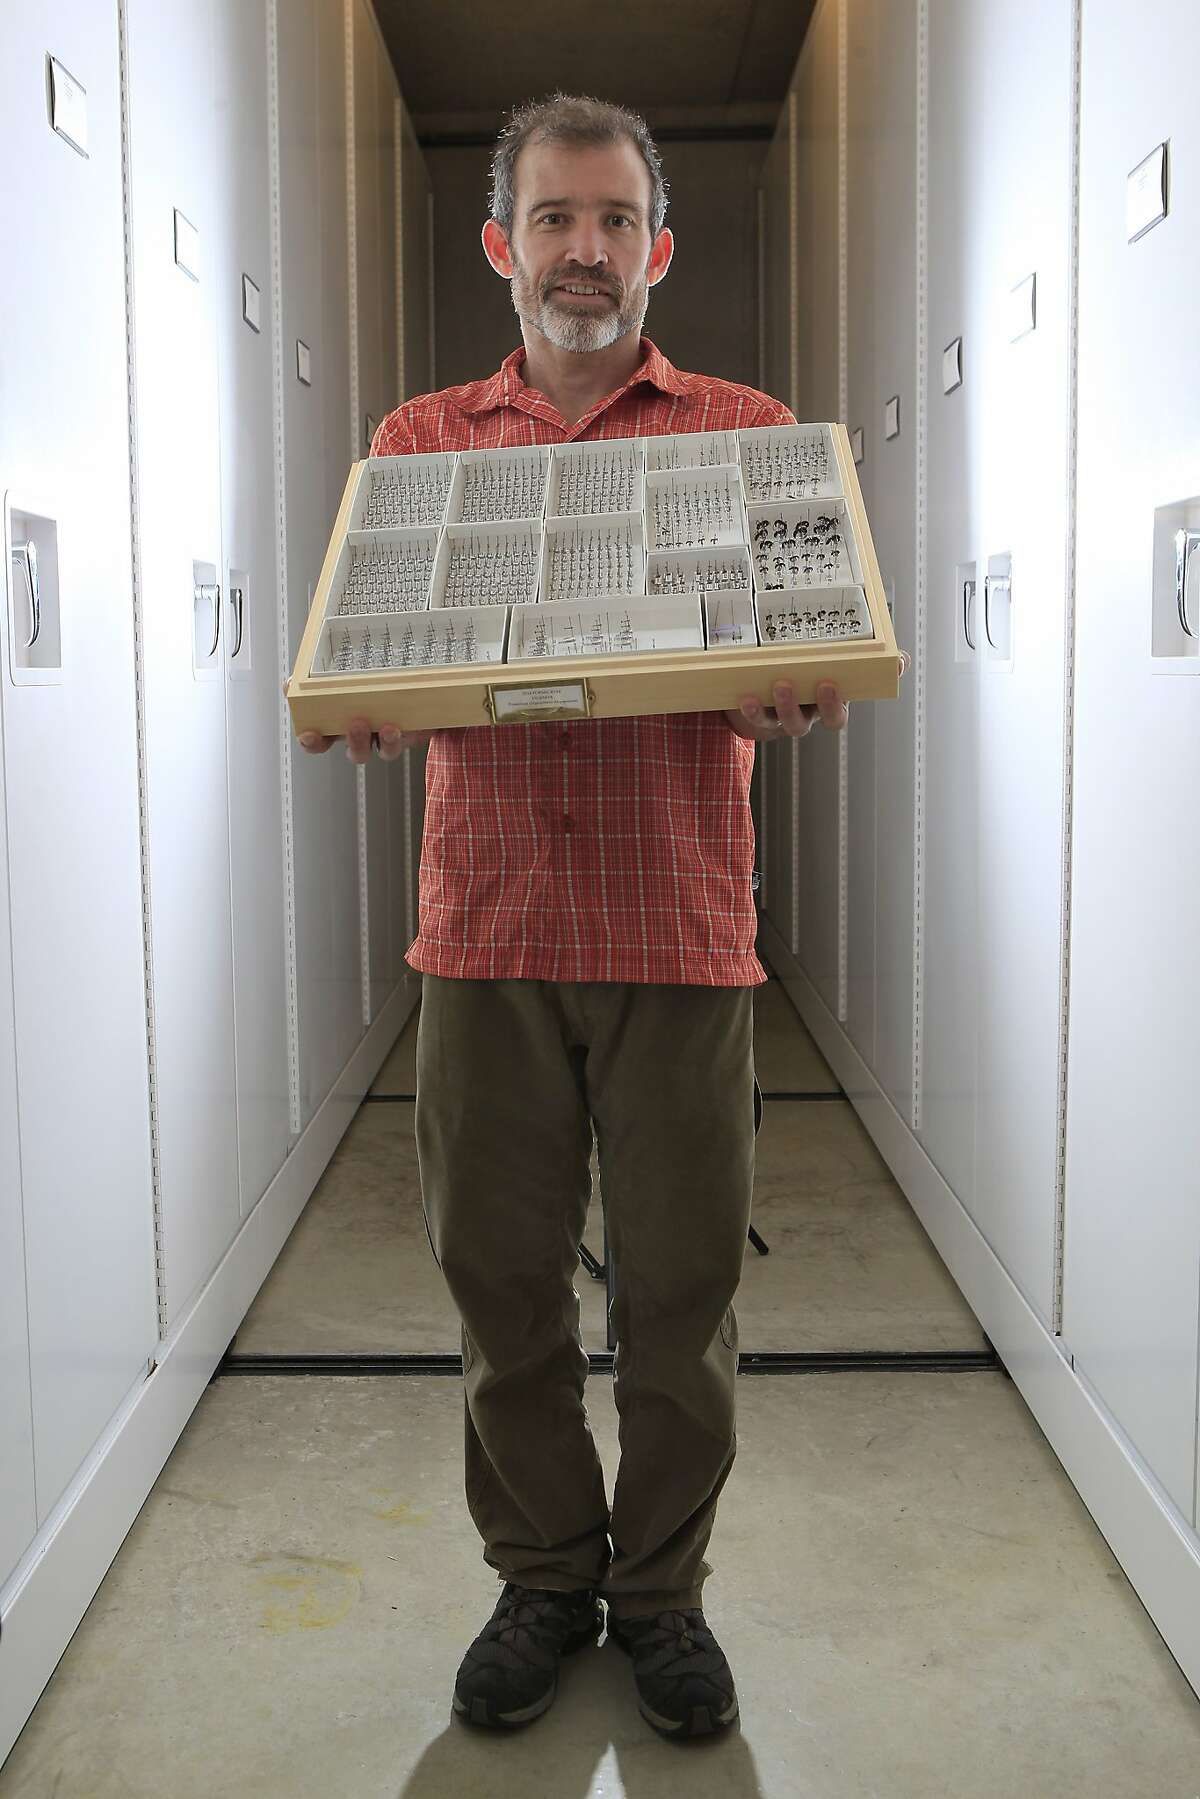 Entomologist Brian Fisher holds a board of ant specimens in the specimen room at the Academy of Sciences in San Francisco, CA, Thursday, August 28, 2014.